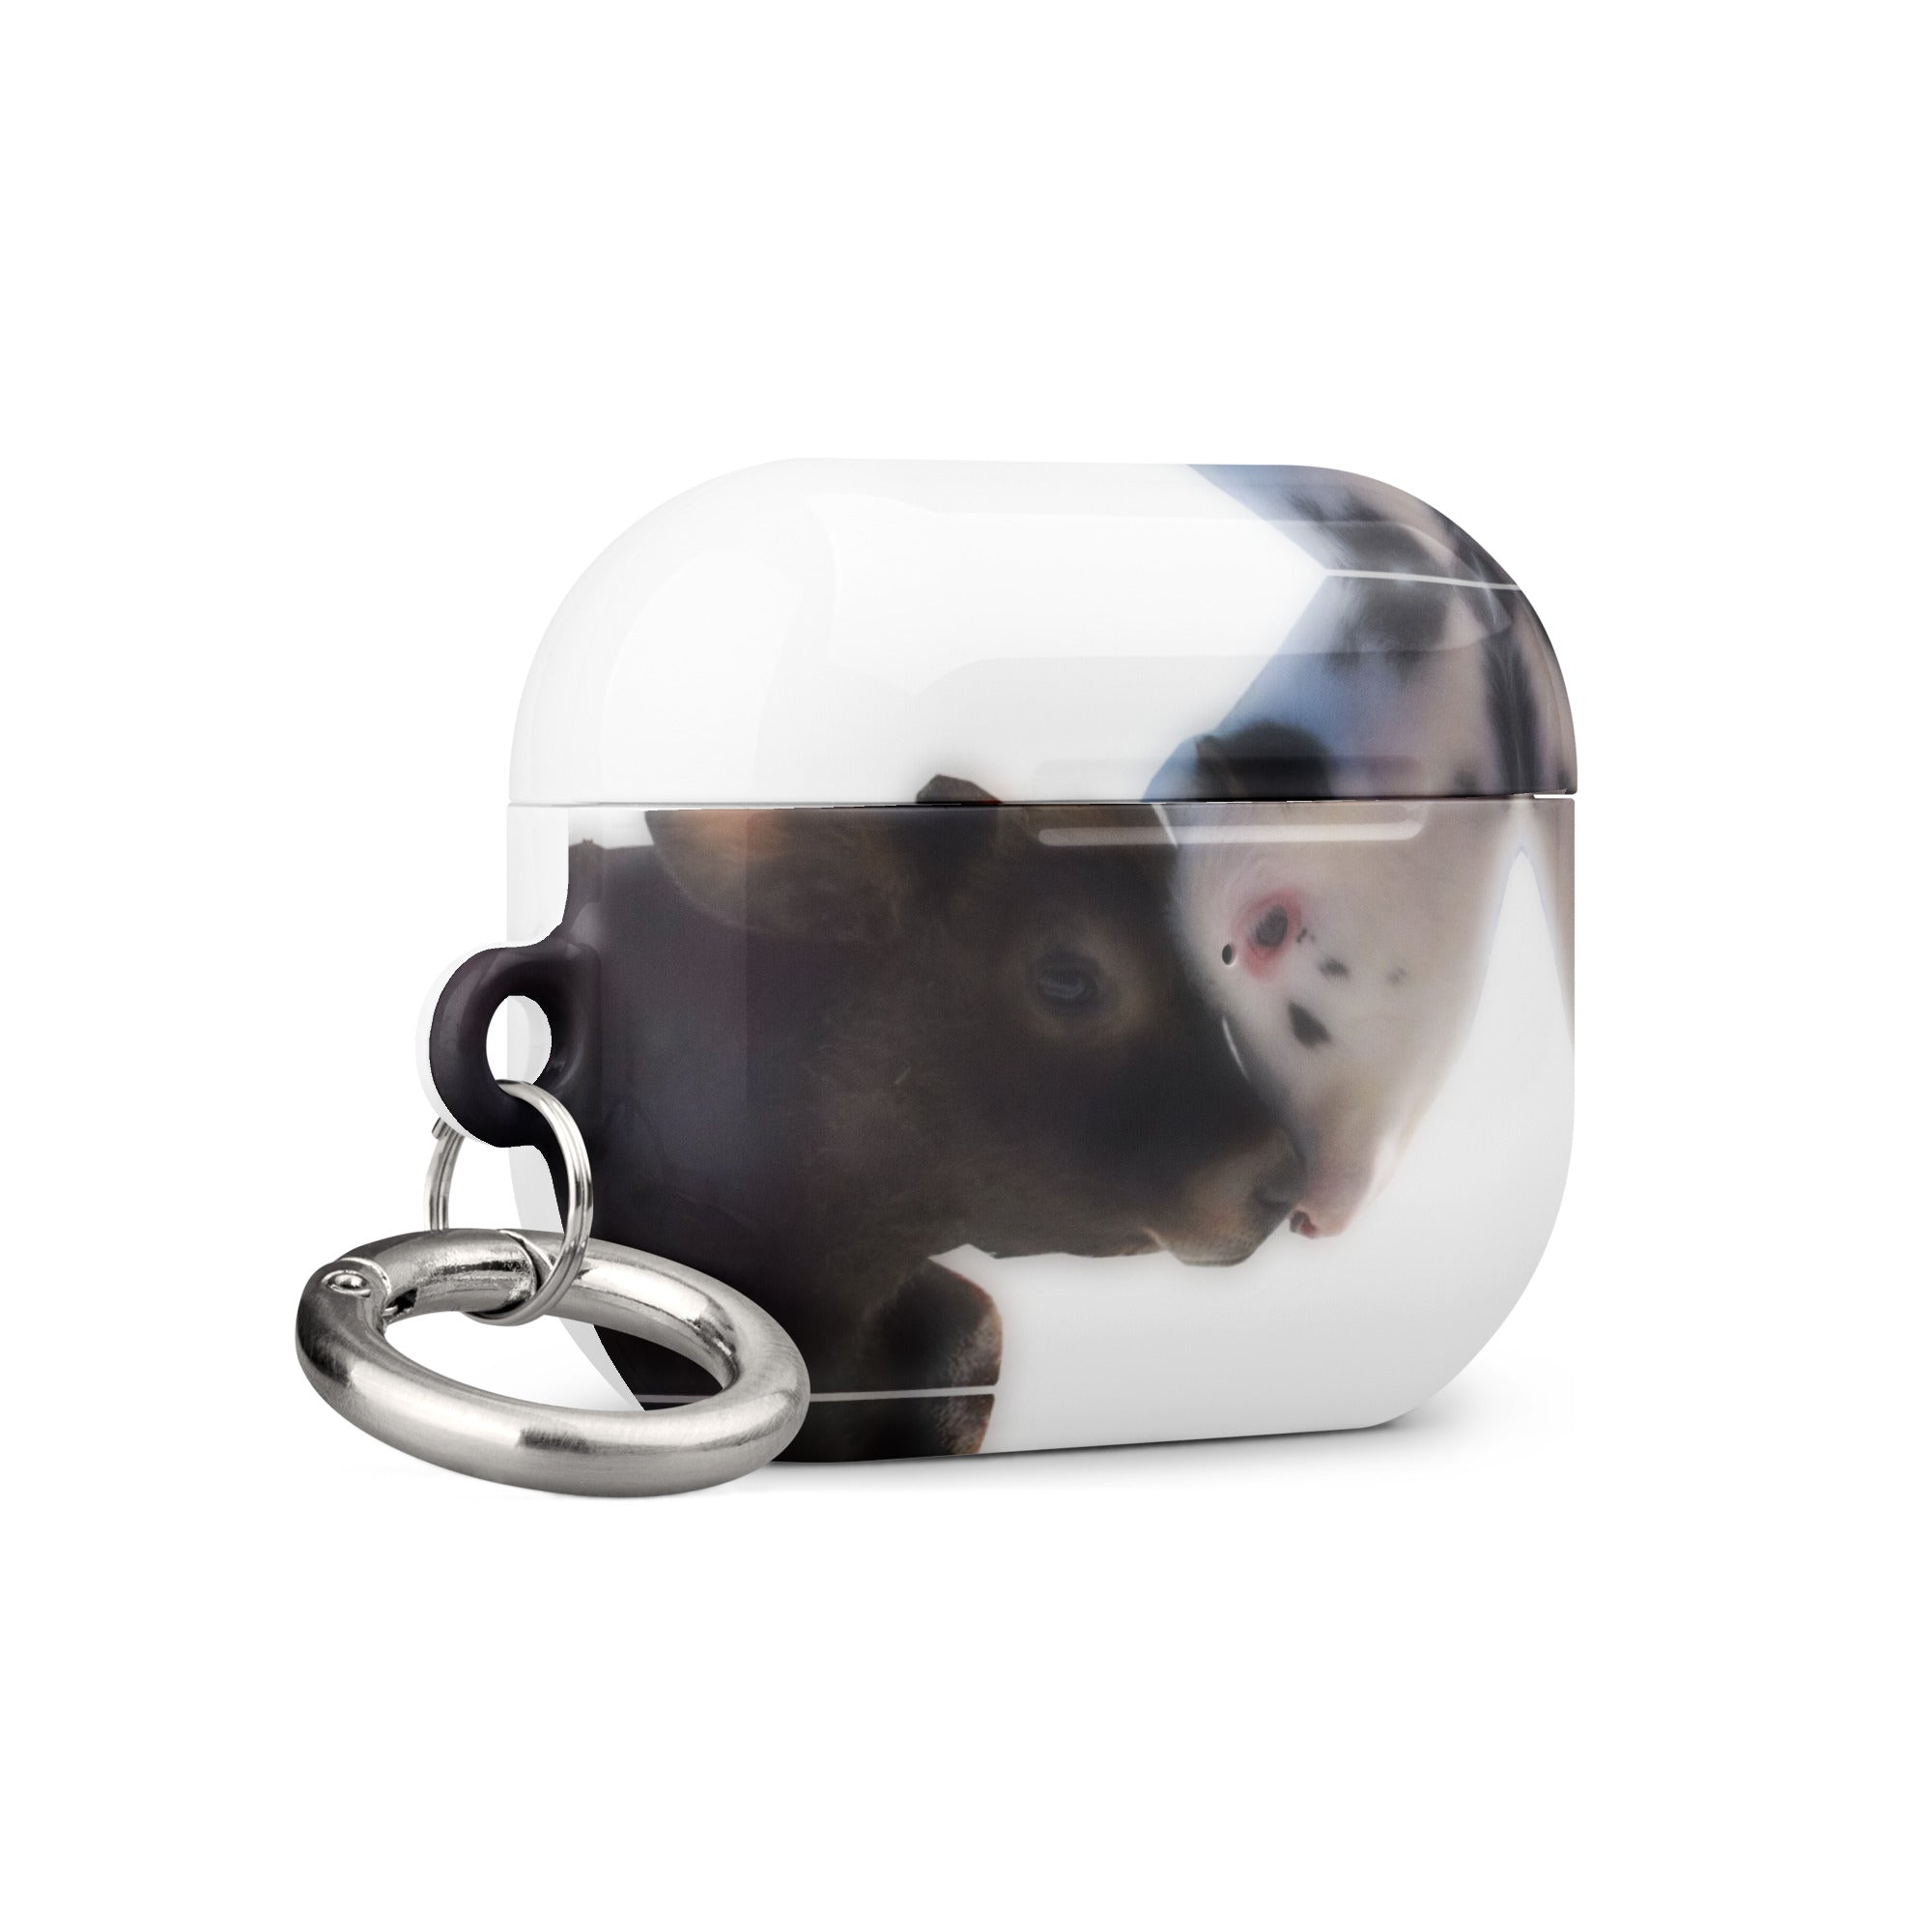 Tender® Airpods case